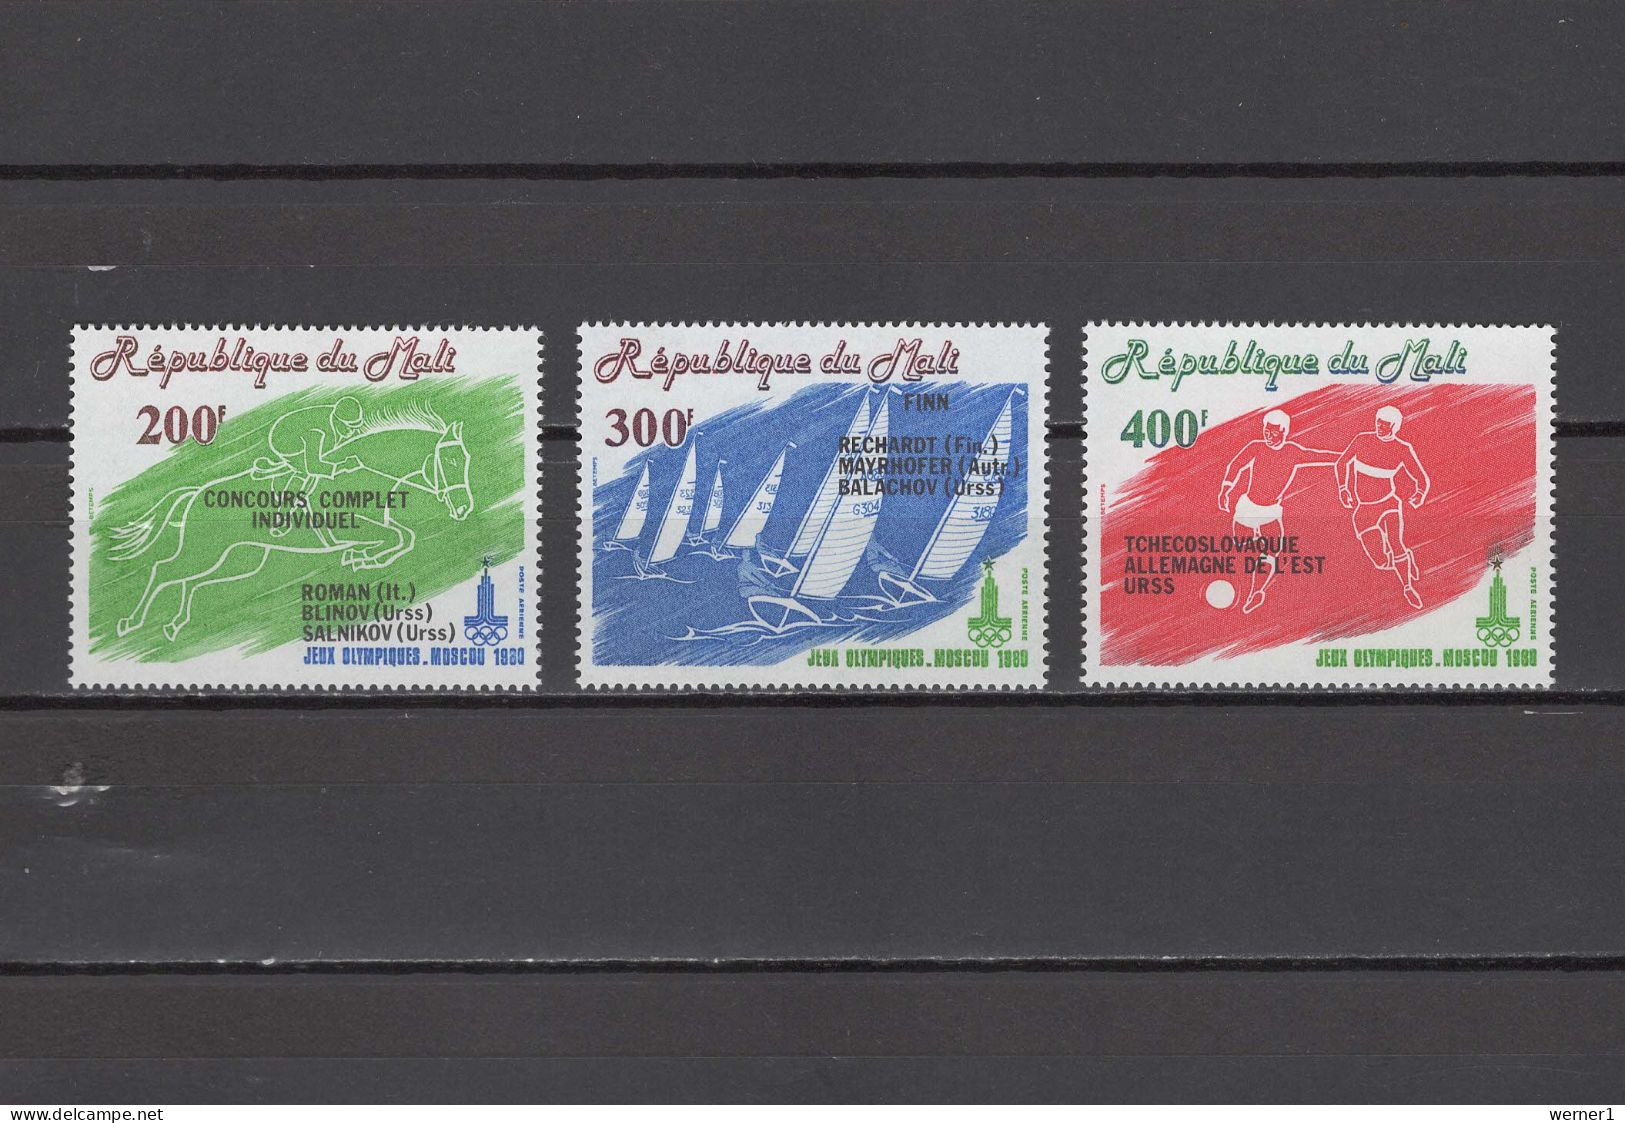 Mali 1980 Olympic Games Moscow, Equestrian, Sailing, Football Soccer Set Of 3 With Winners Overprint MNH - Ete 1980: Moscou